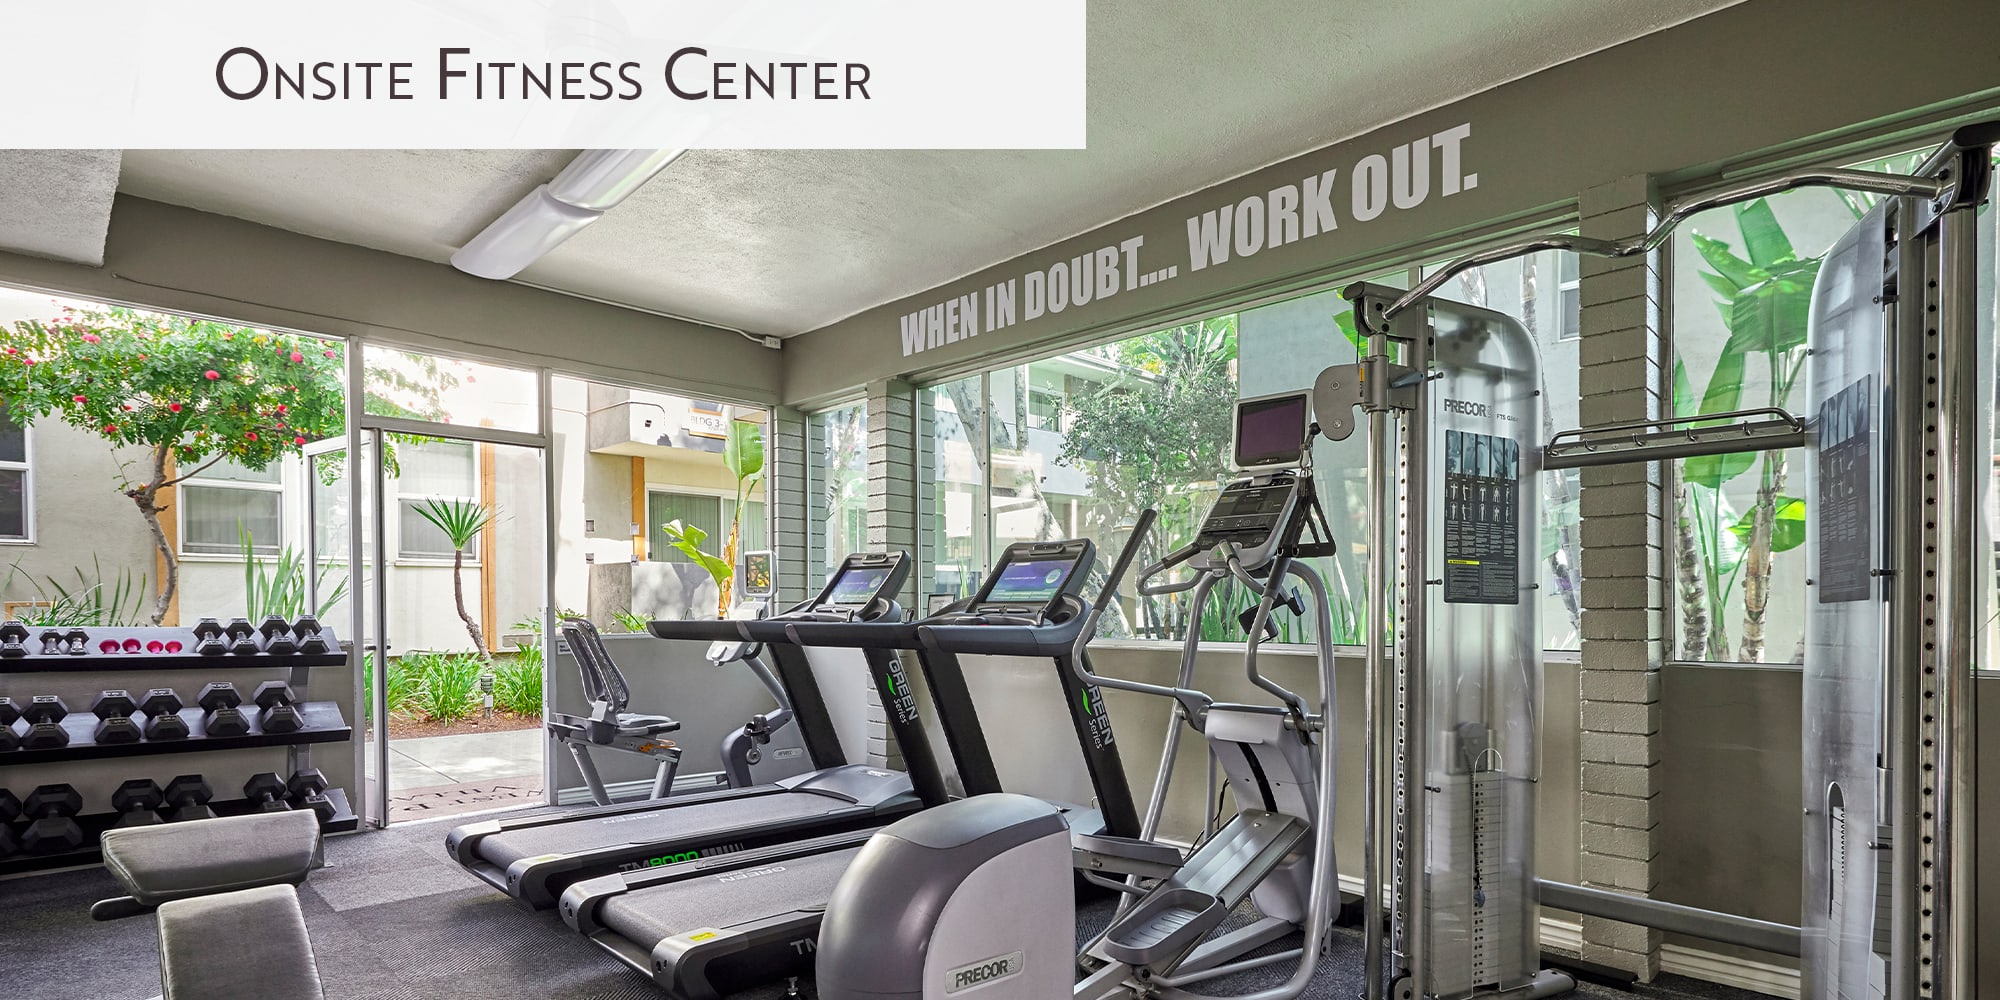 Onsite fitness center at West Park Village in Los Angeles, California